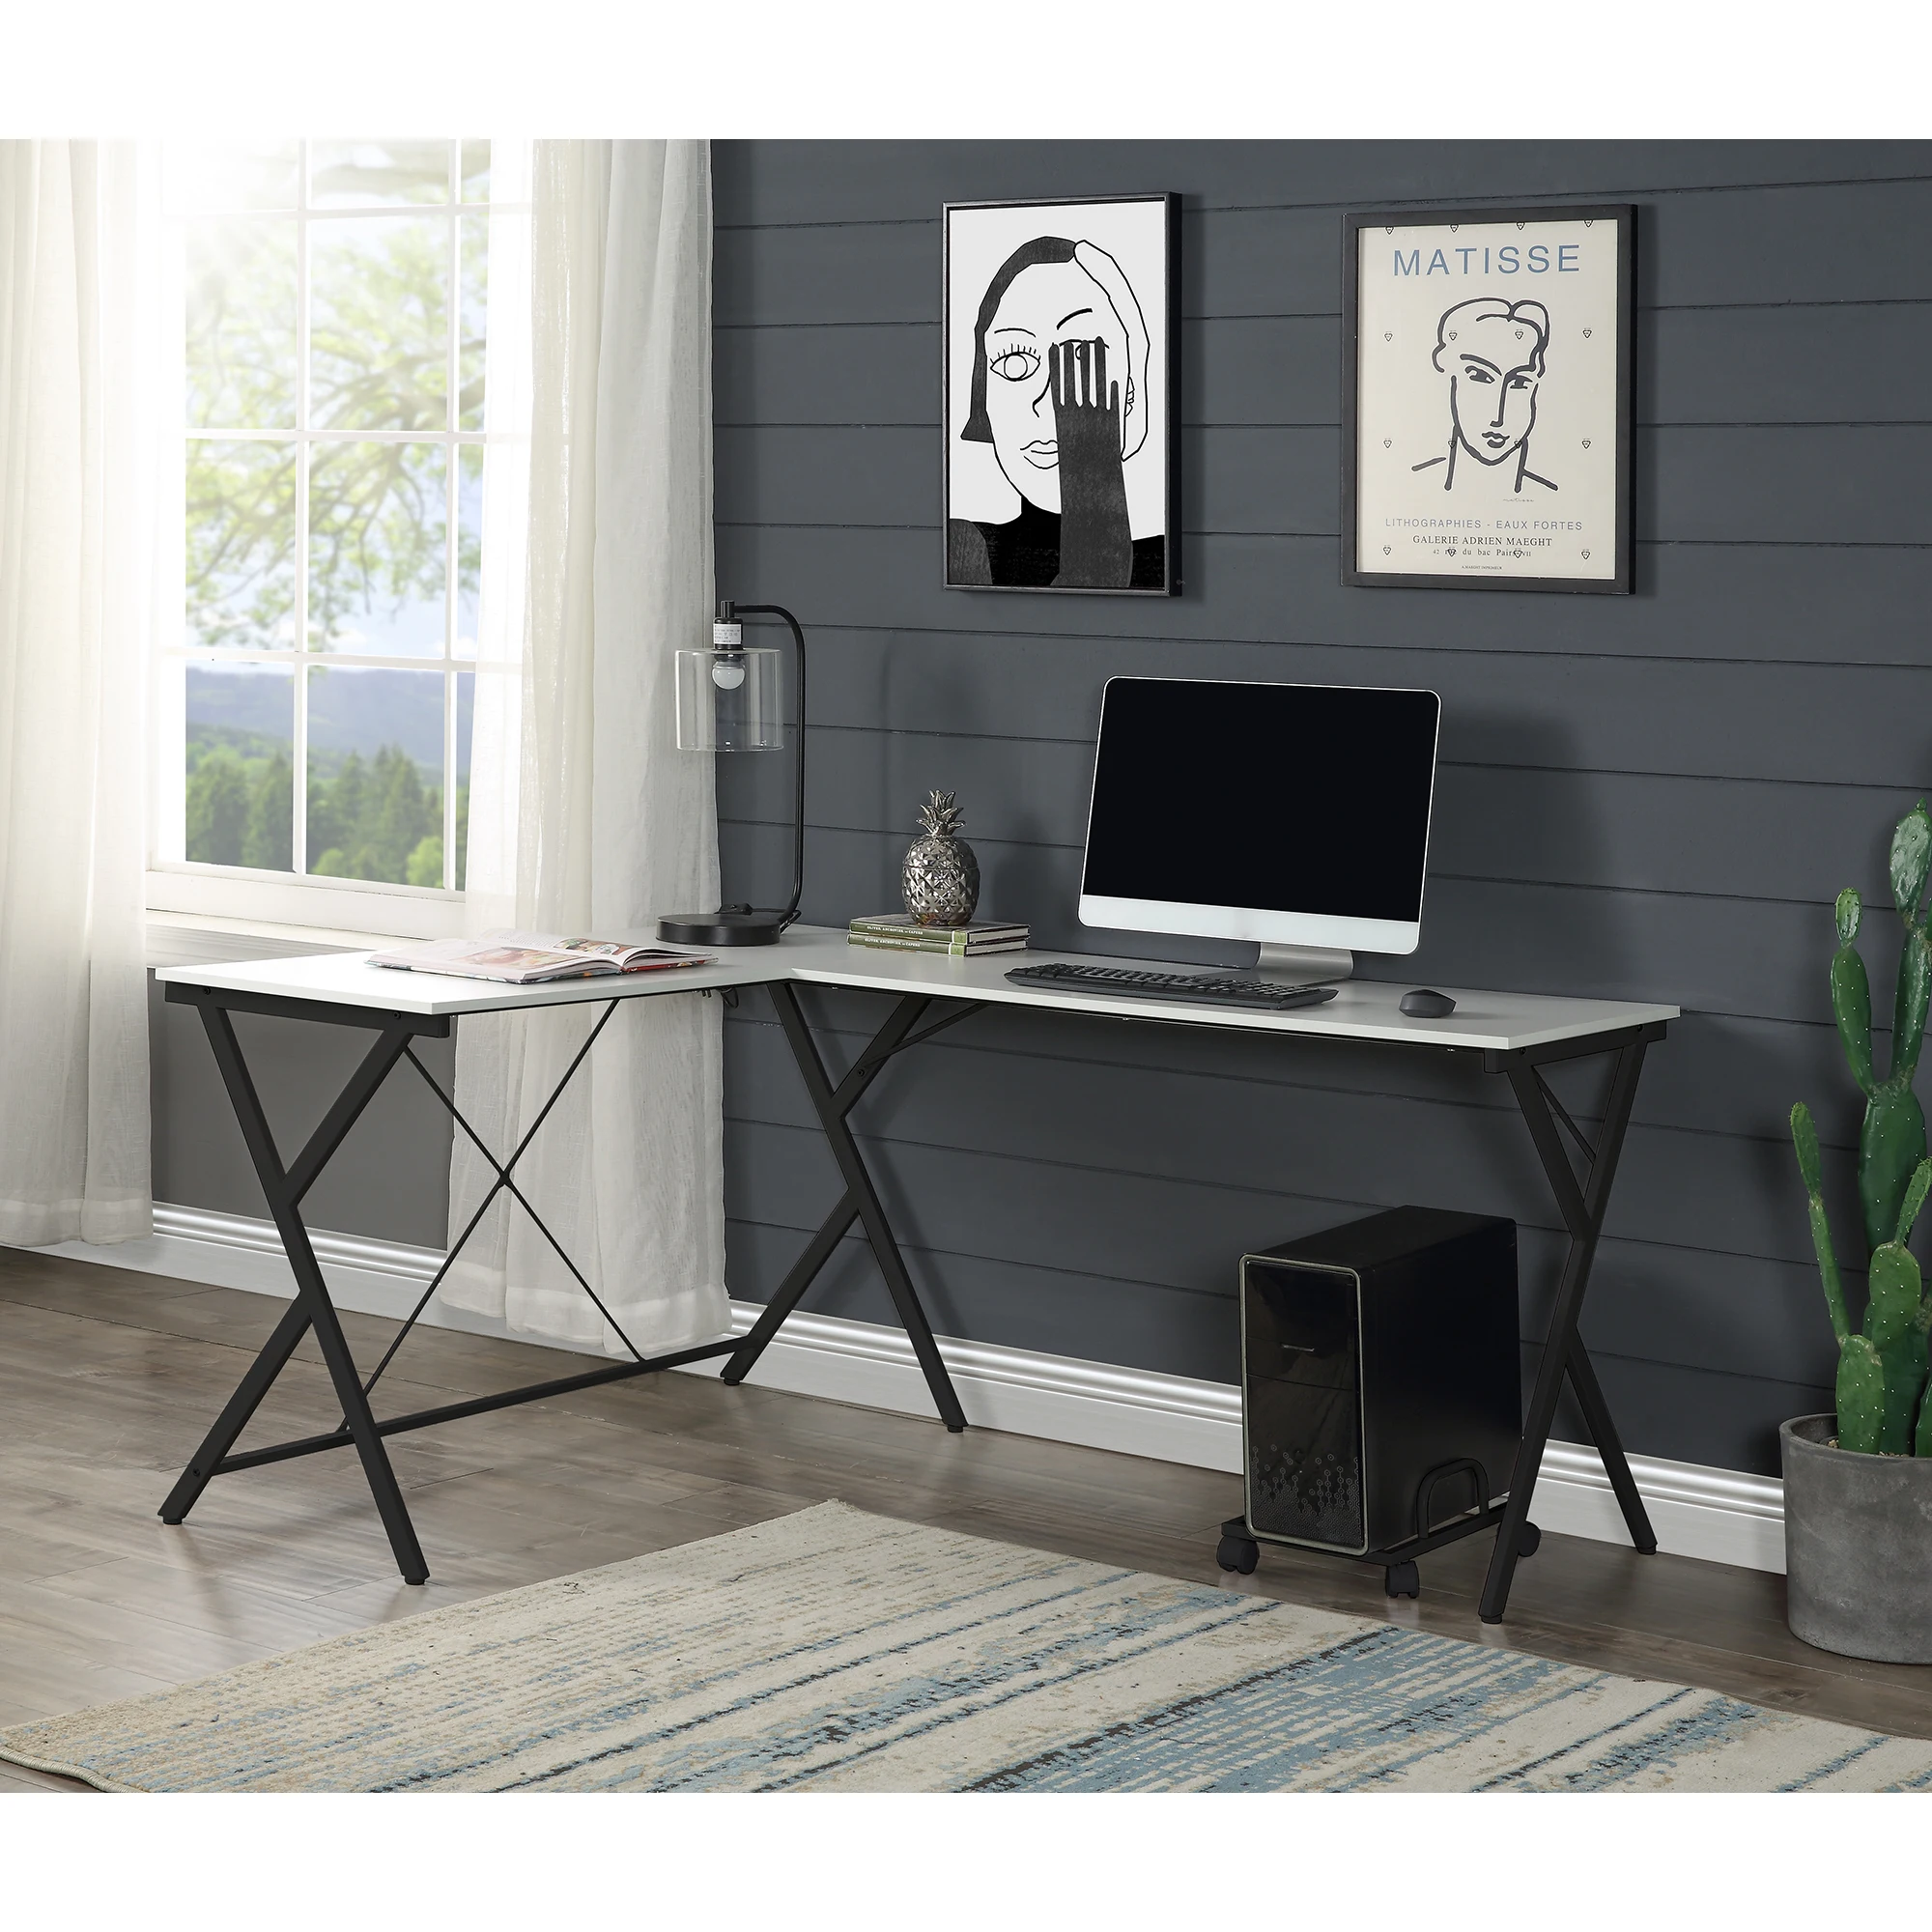 [Flash Sale]Dazenus Corner Computer Desk L-Shaped Office Game Table in White/Black Finish Ideal for Office Study & Game[US-W]